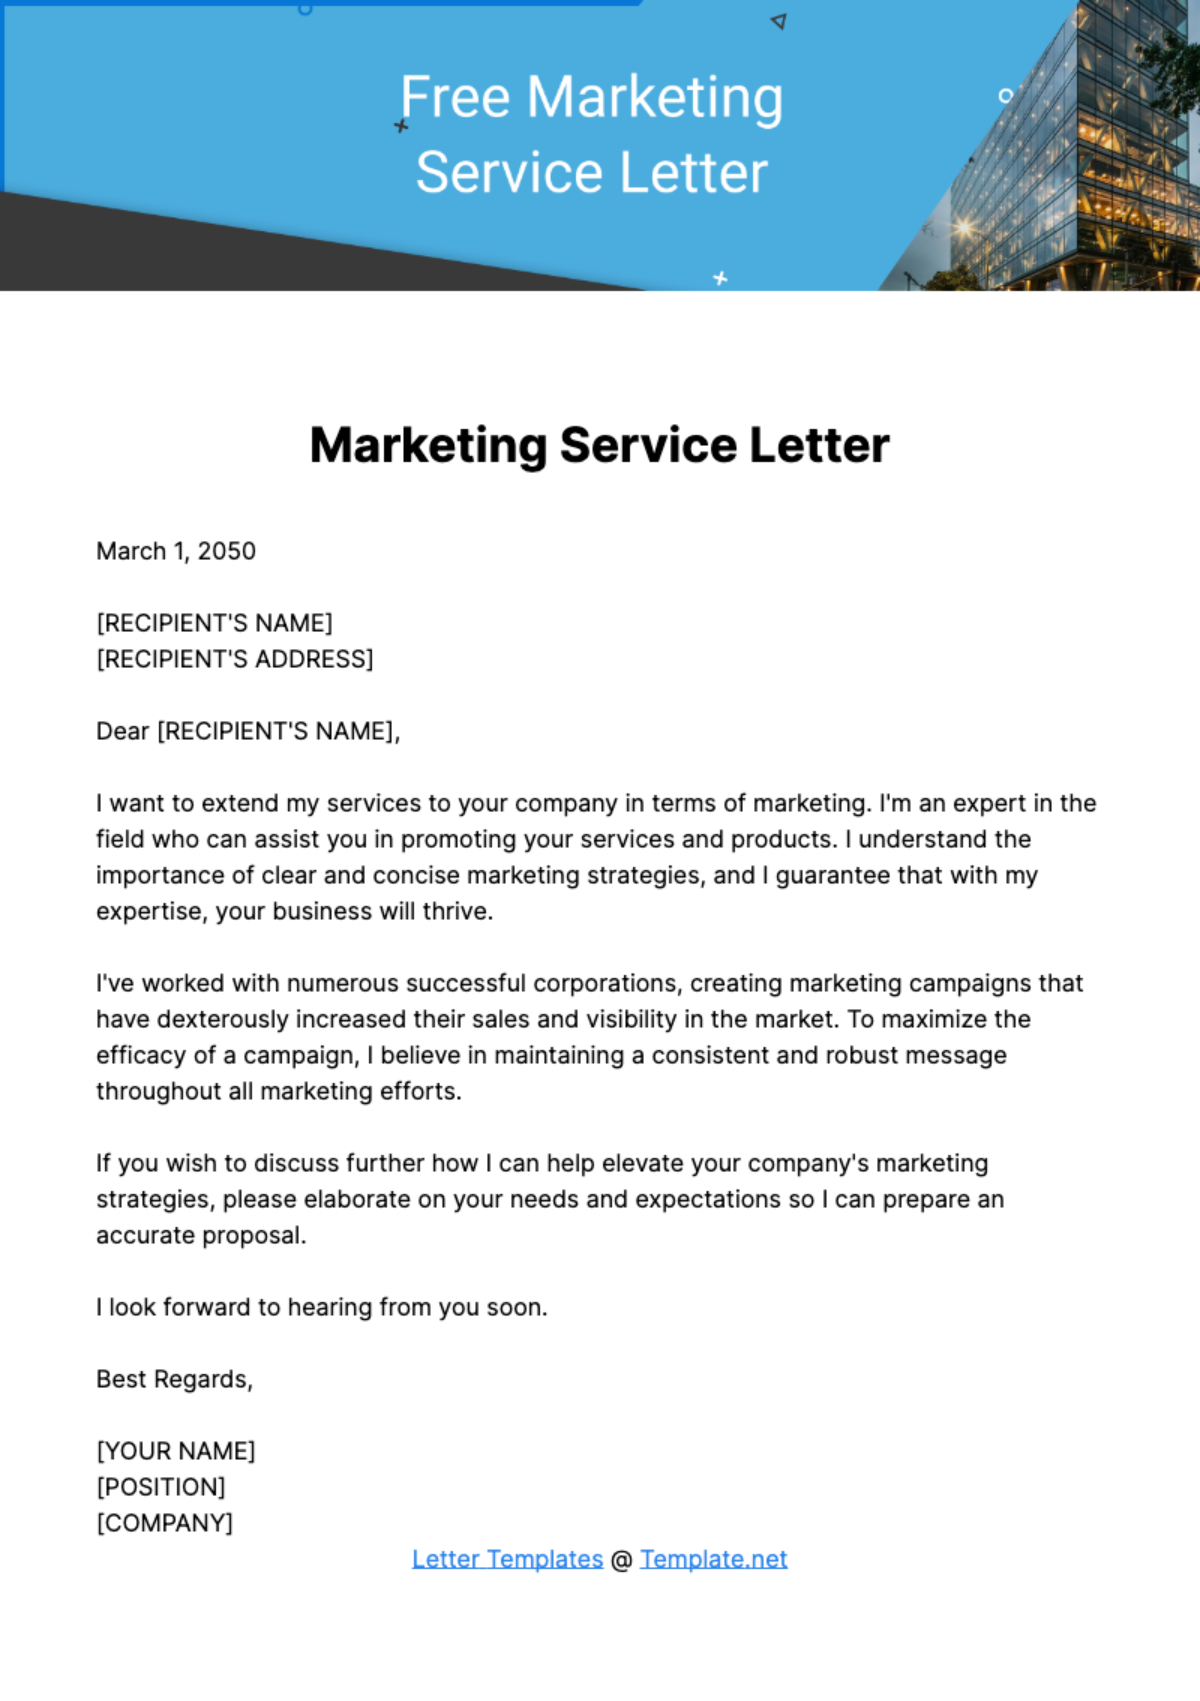 Free Marketing Service Letter Template